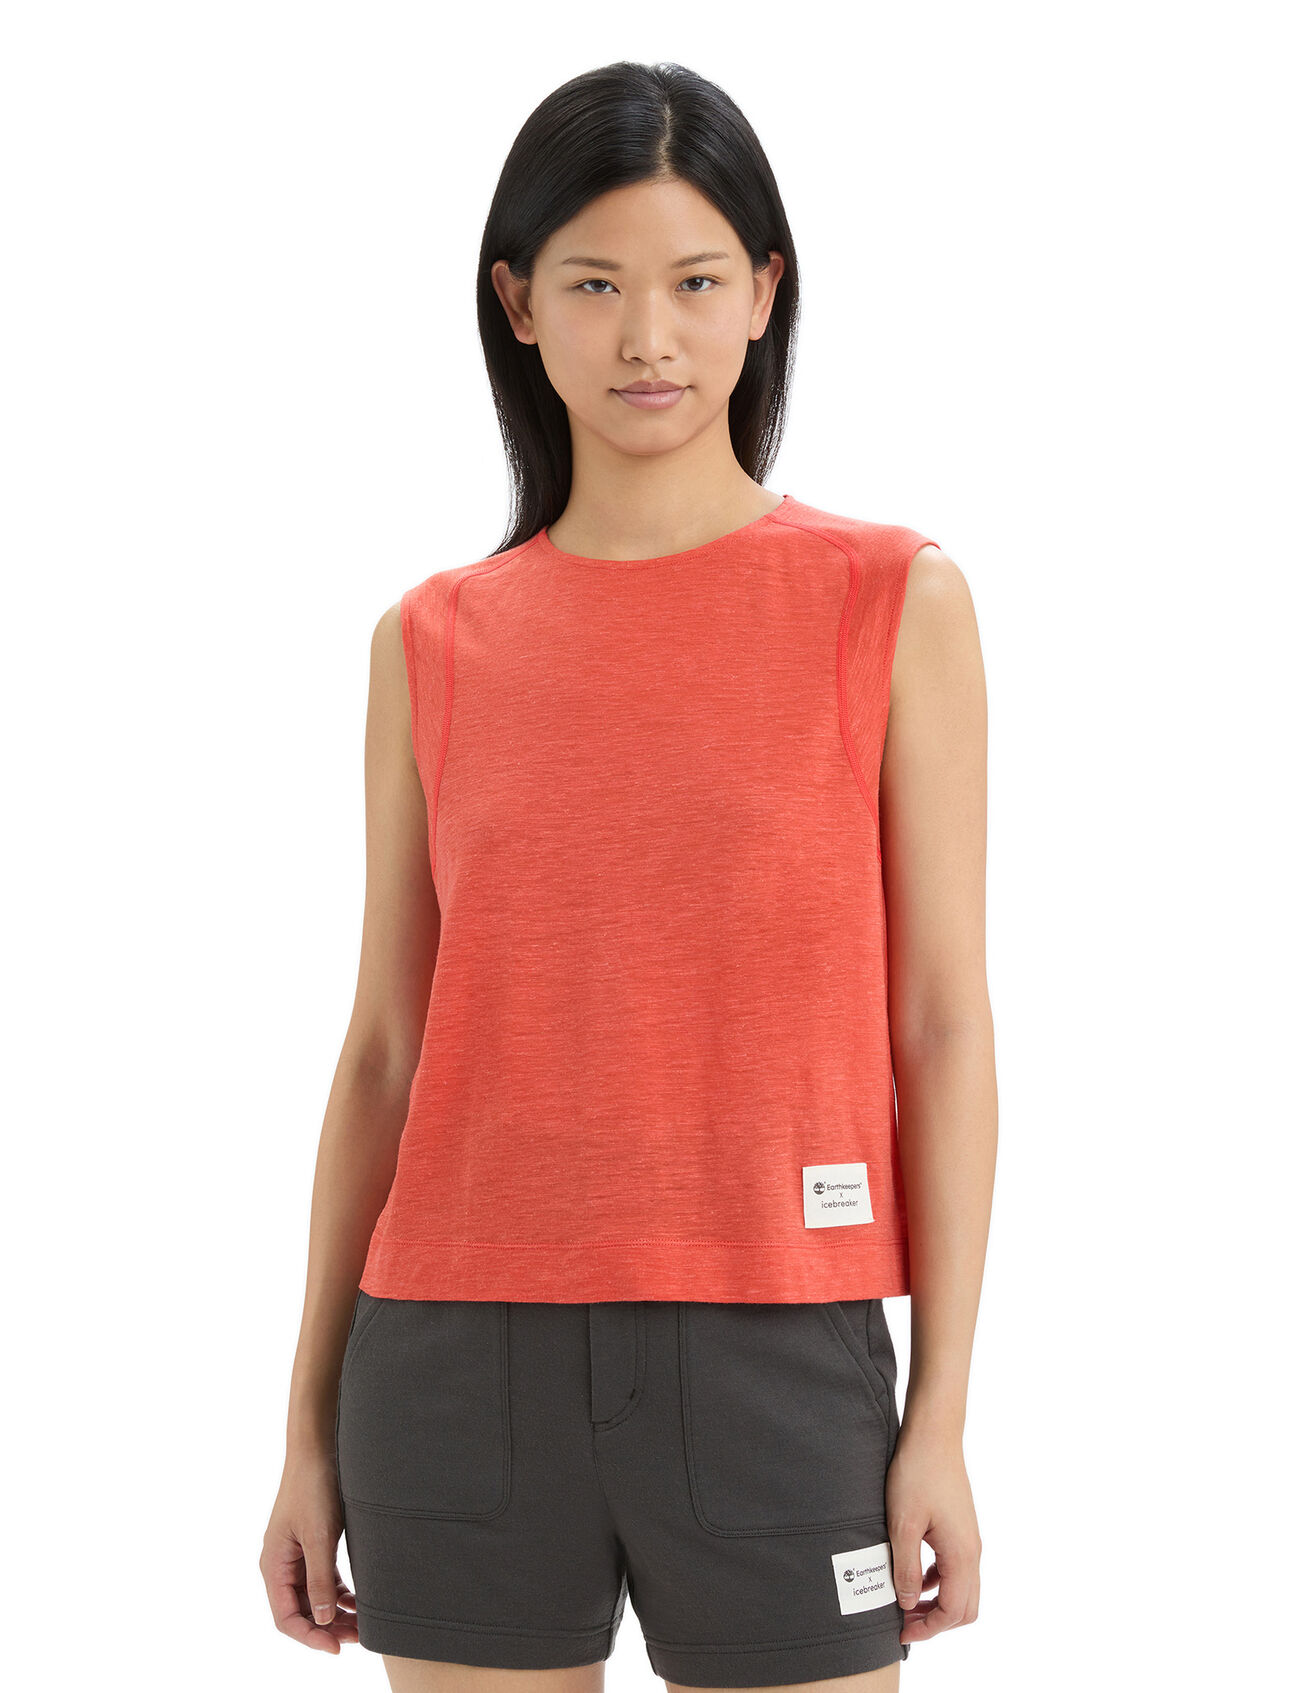 Womens Timberland x icebreaker Merino Linen Sleeveless Top Designed in collaboration with Timberland, the Timberland x icebreaker Merino Linen Sleeveless Top is a casual warm-weather piece that blend the natural performance of merino with the soft, airy comfort of linen. 